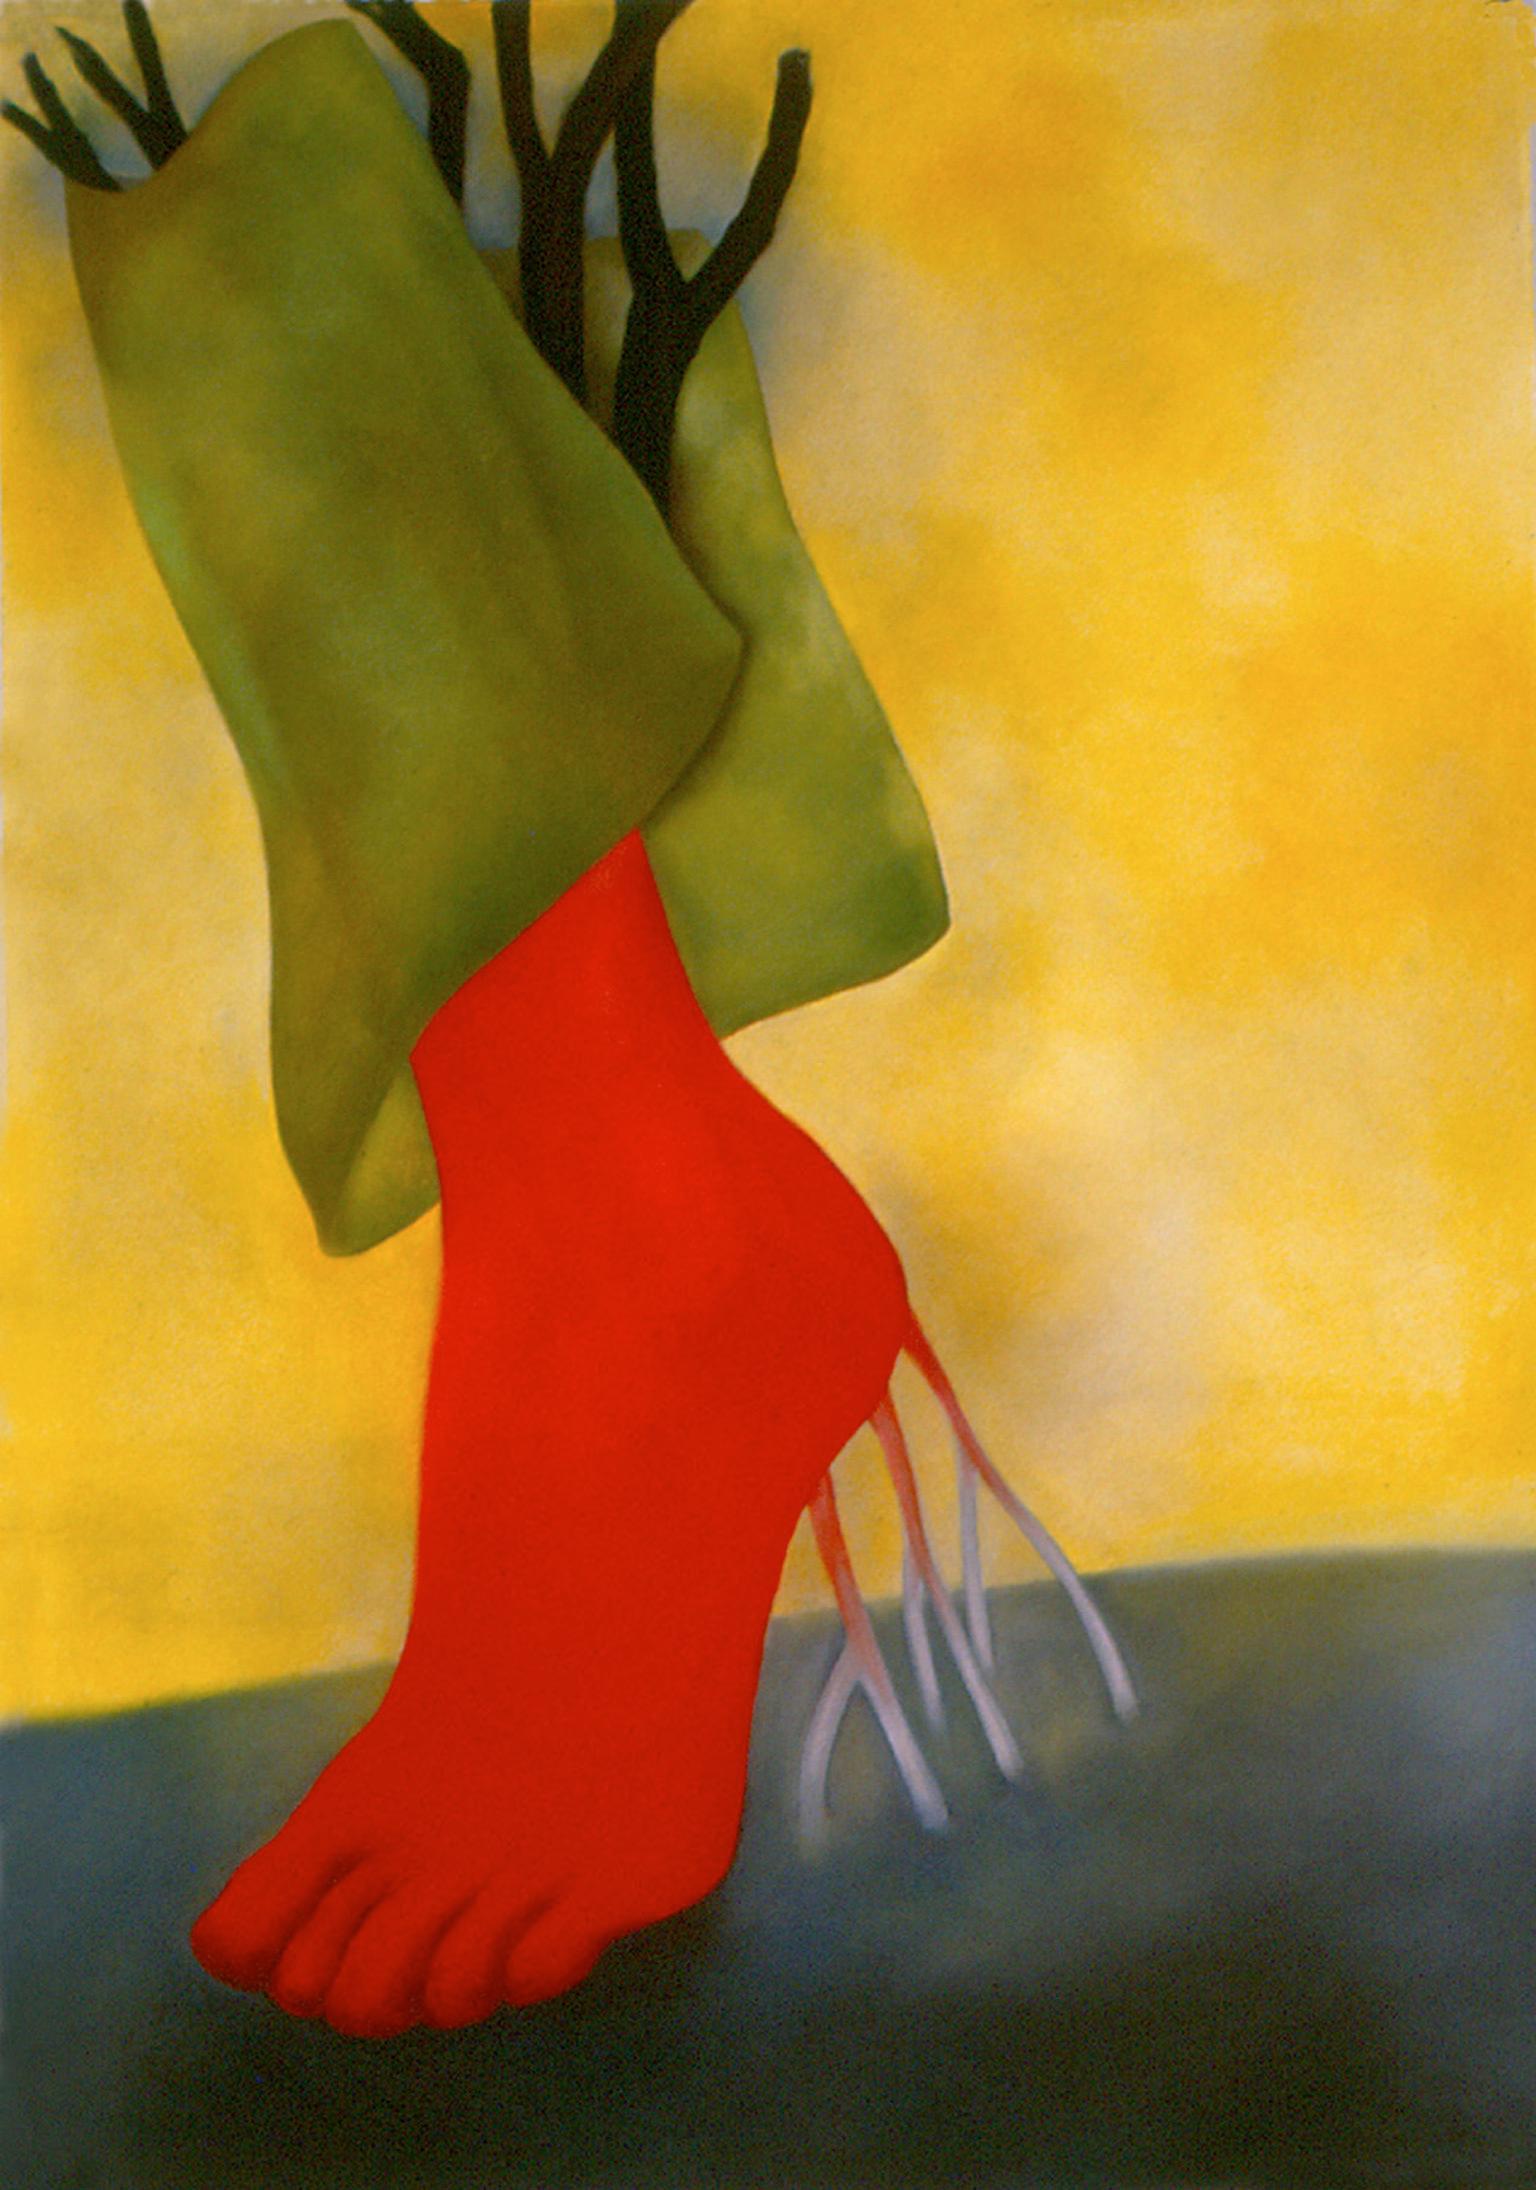 Marilyn Davidson Figurative Art - "Rooted", a pastel in warm yellows, oranges and greens